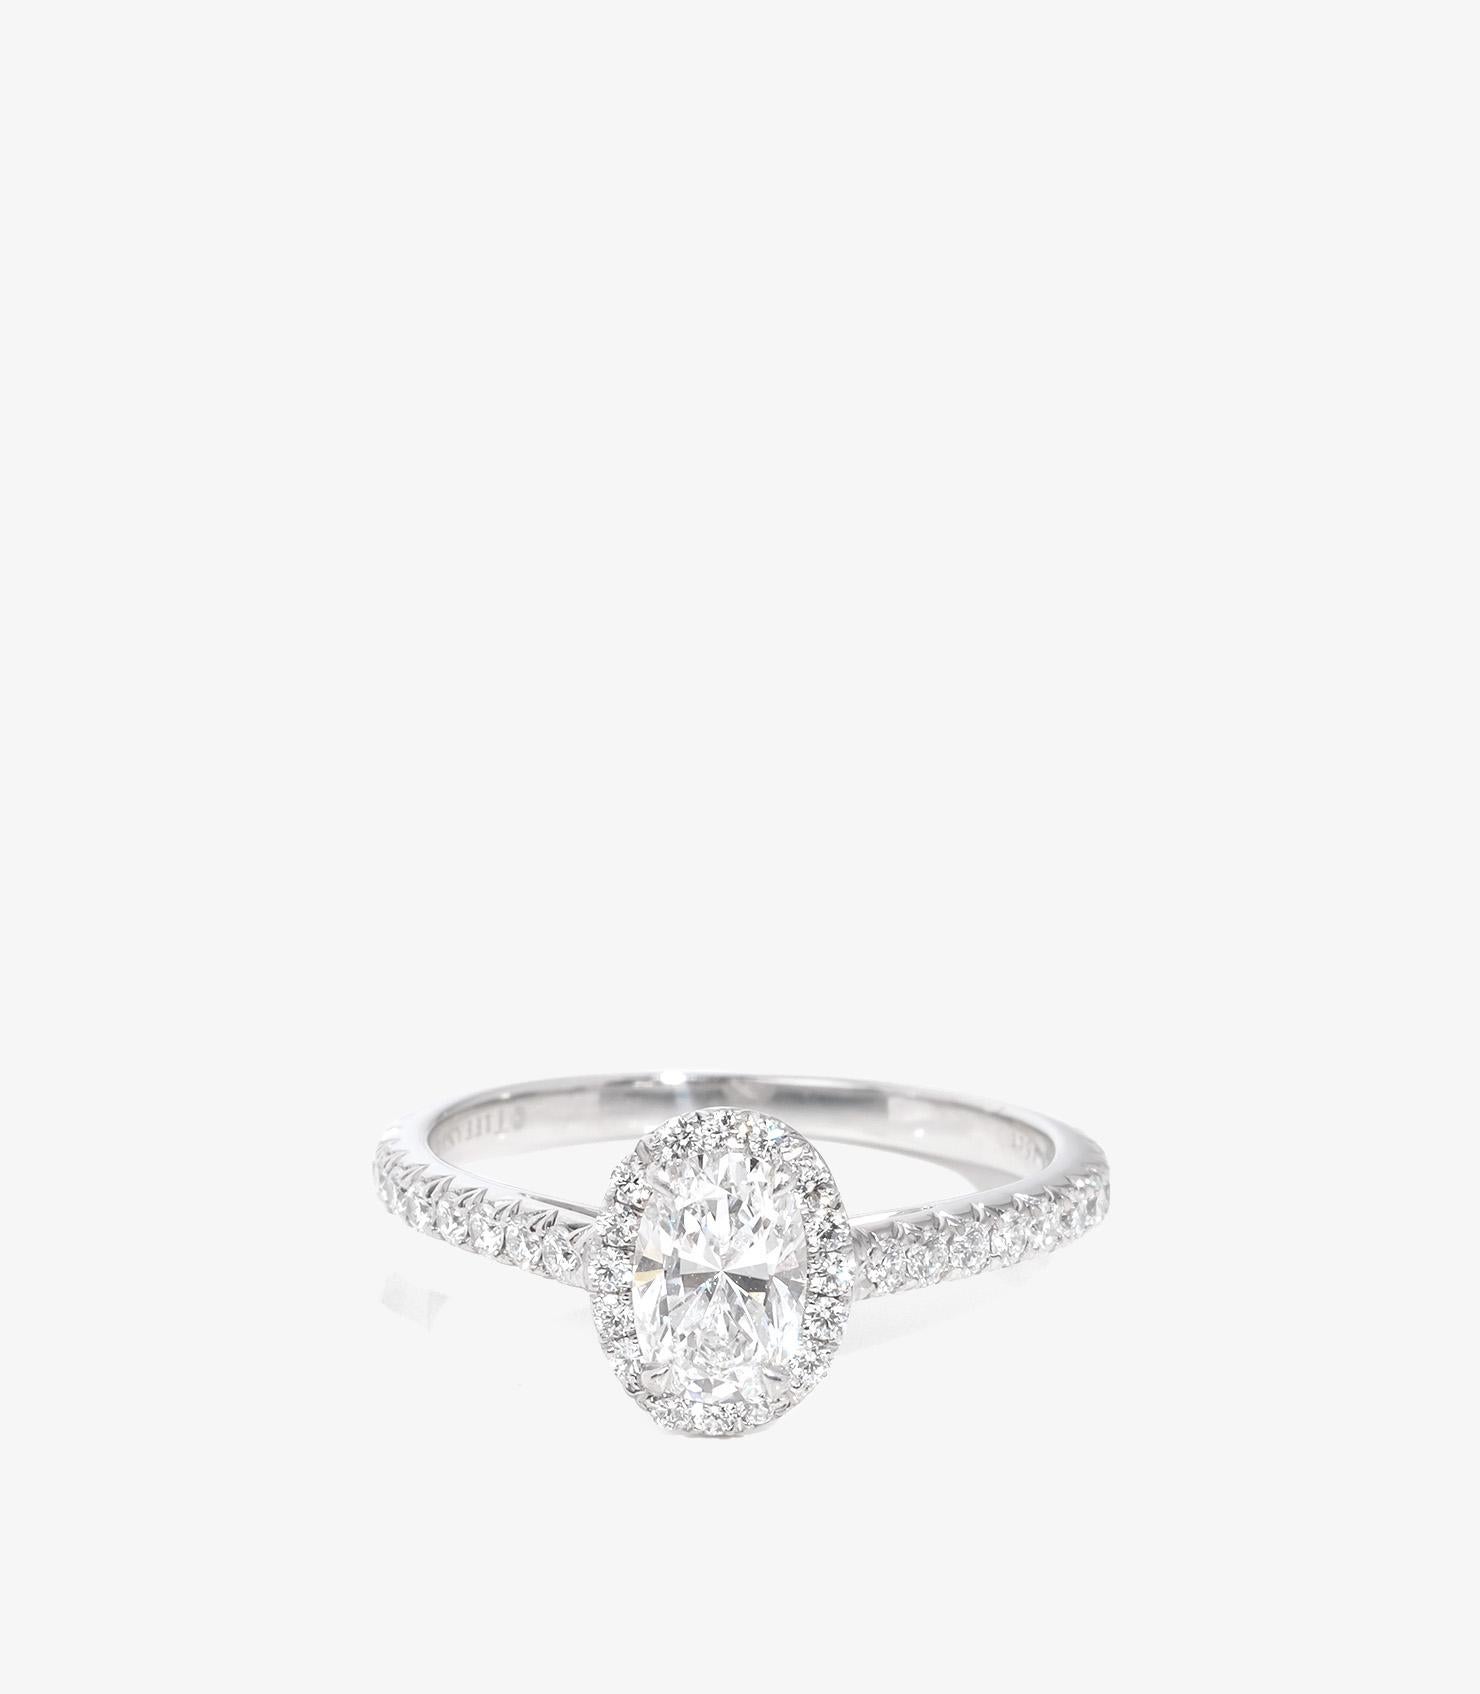 Tiffany & Co. 0.46ct Oval Cut Diamond Platinum Soleste Ring

Brand- Tiffany & Co.
Model- Soleste Ring
Product Type- Ring
Serial Number- 33******
Accompanied By- Tiffany & Co. Box, Certificate
Material(s)- Platinum
Gemstone- Diamond
Secondary